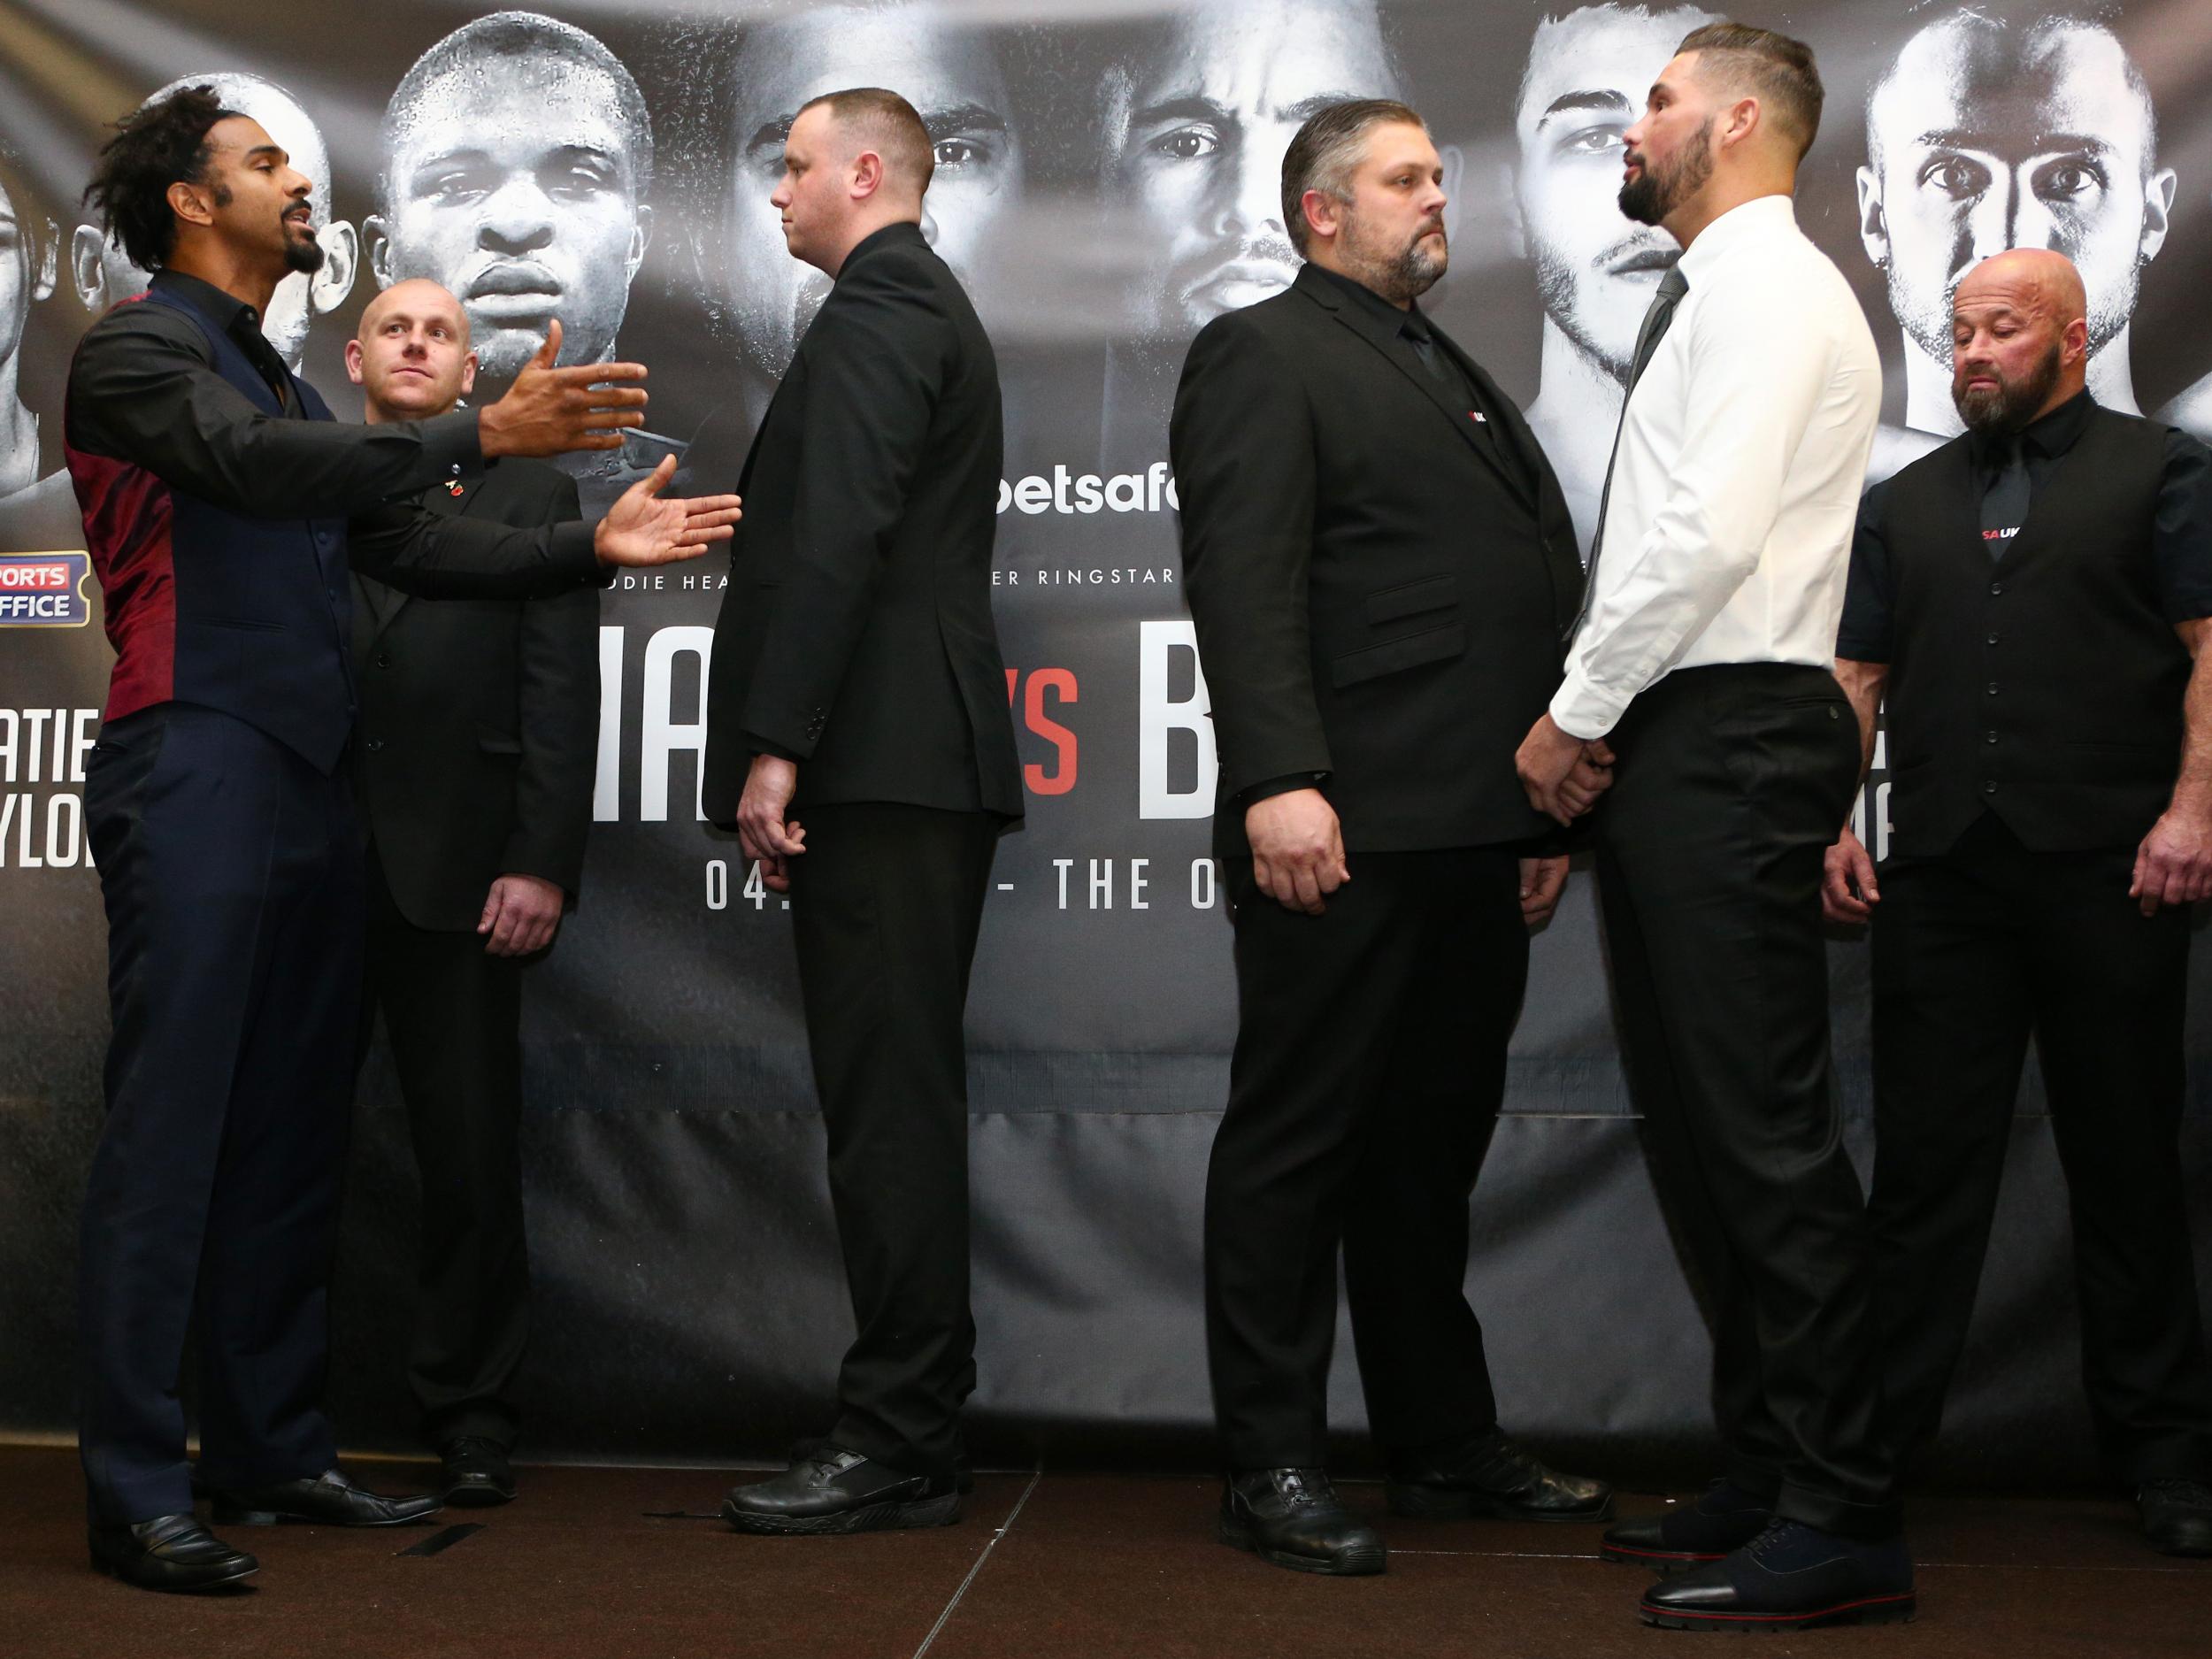 Haye and Bellew clashes in a bad-tempered news conference